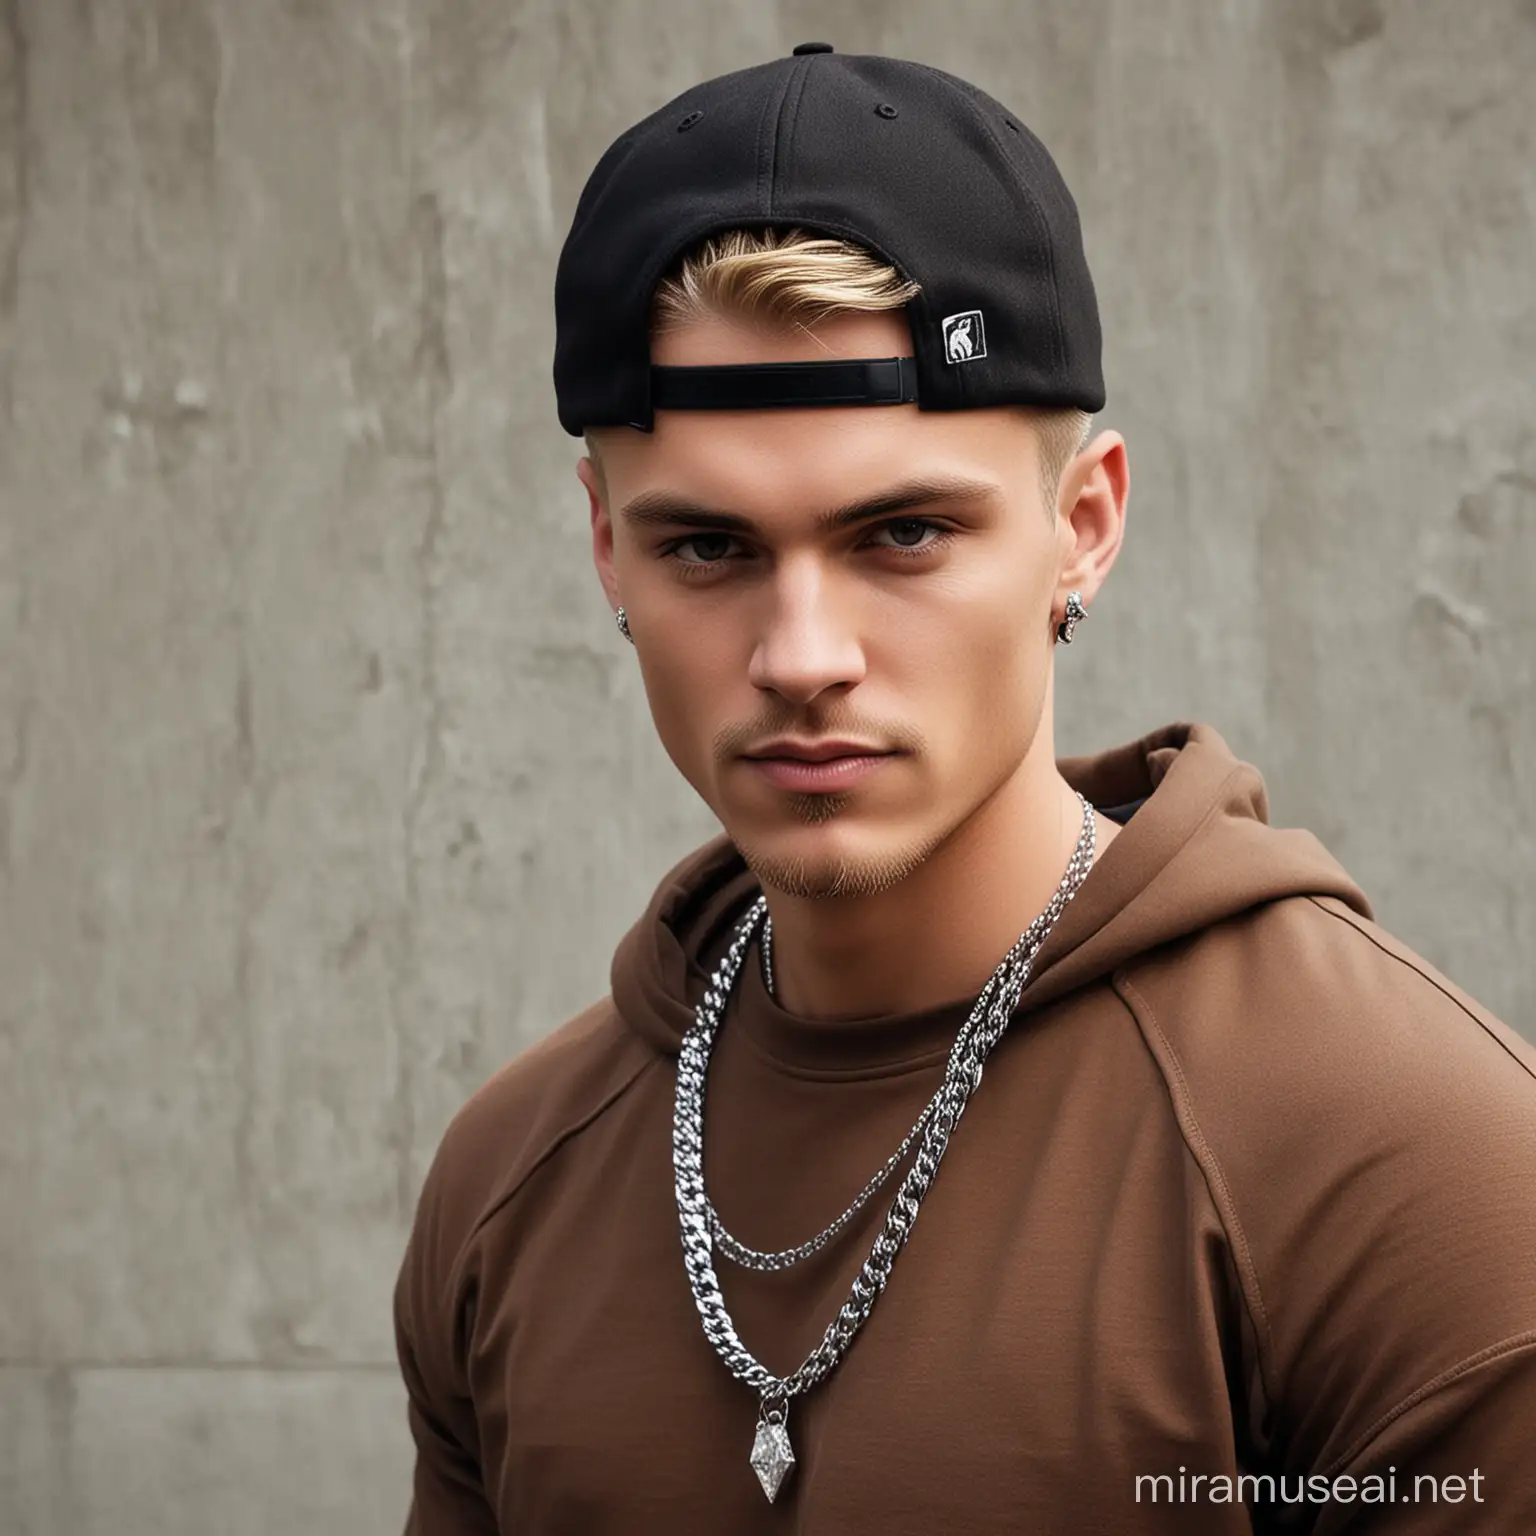 Stylish Blond Man with Low Fade Haircut and DiamondStudded Chain